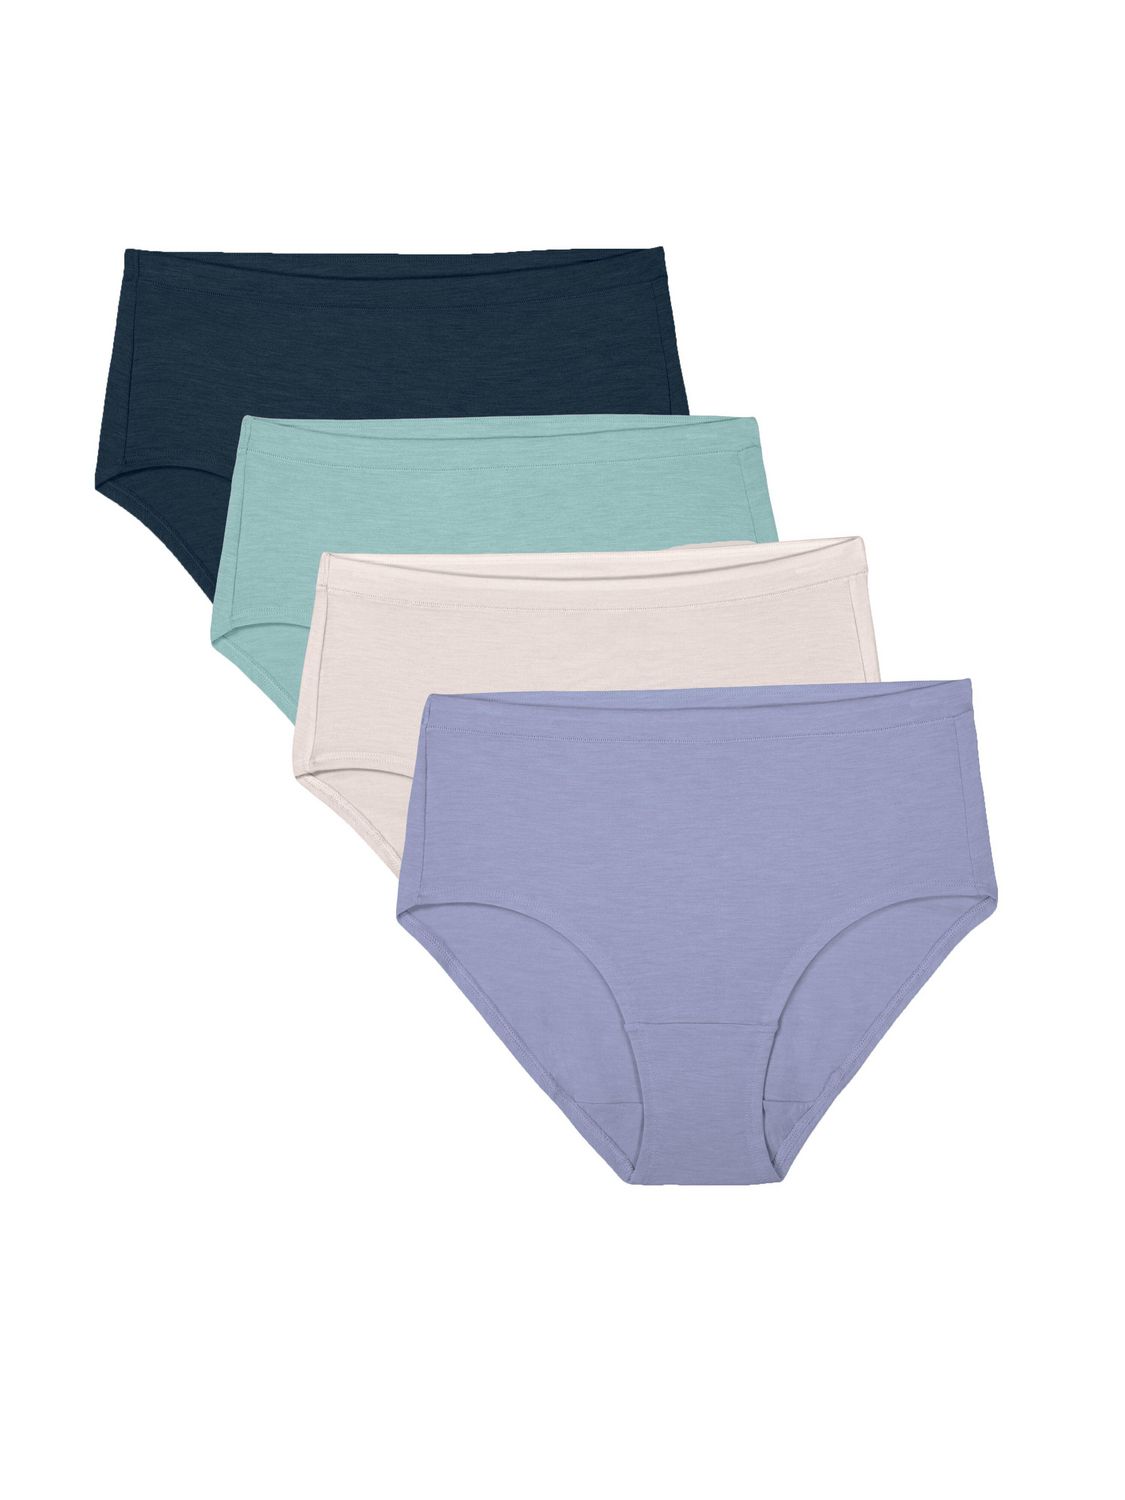 Fruit of the Loom Women's Tag Free Cotton Brief Panties on Sale $8.98